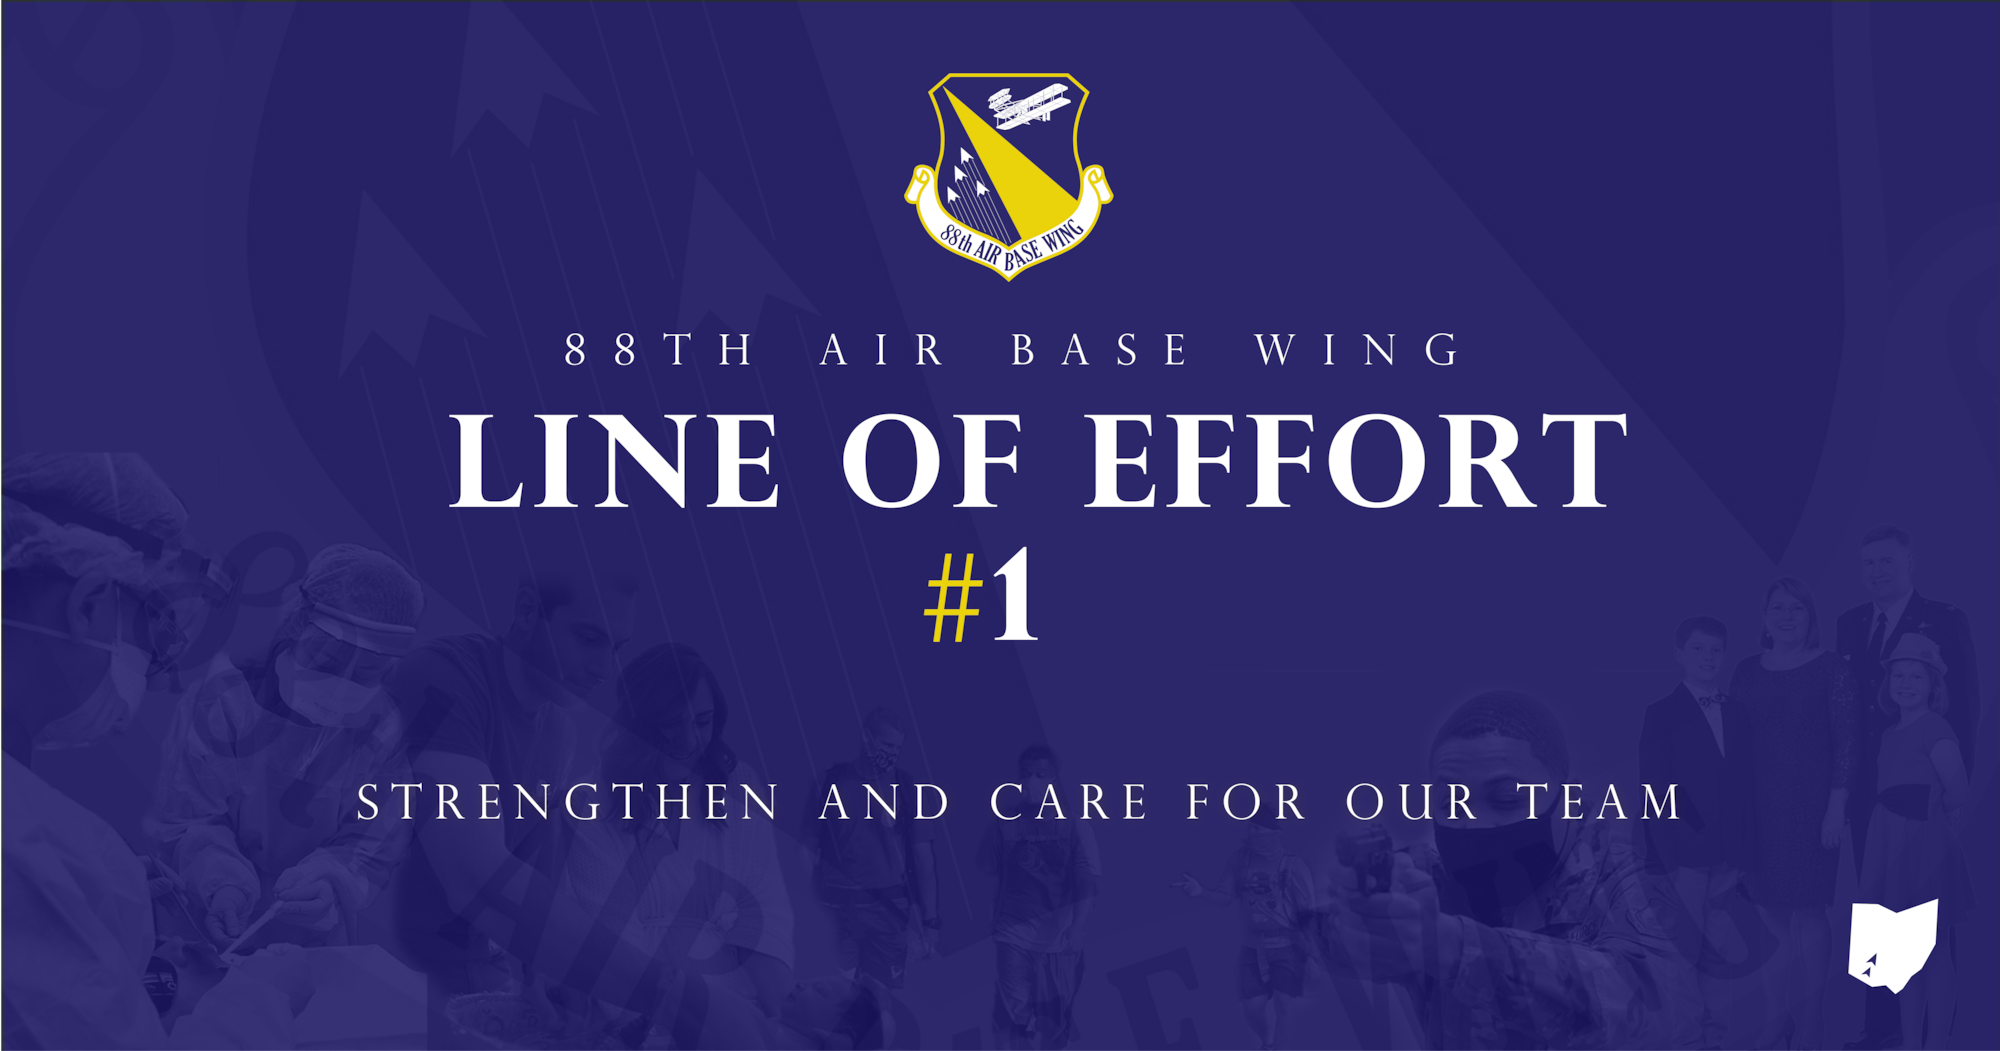 The 88th Air Base Wing recently updated its lines of effort. (U.S. Air Force Graphic)